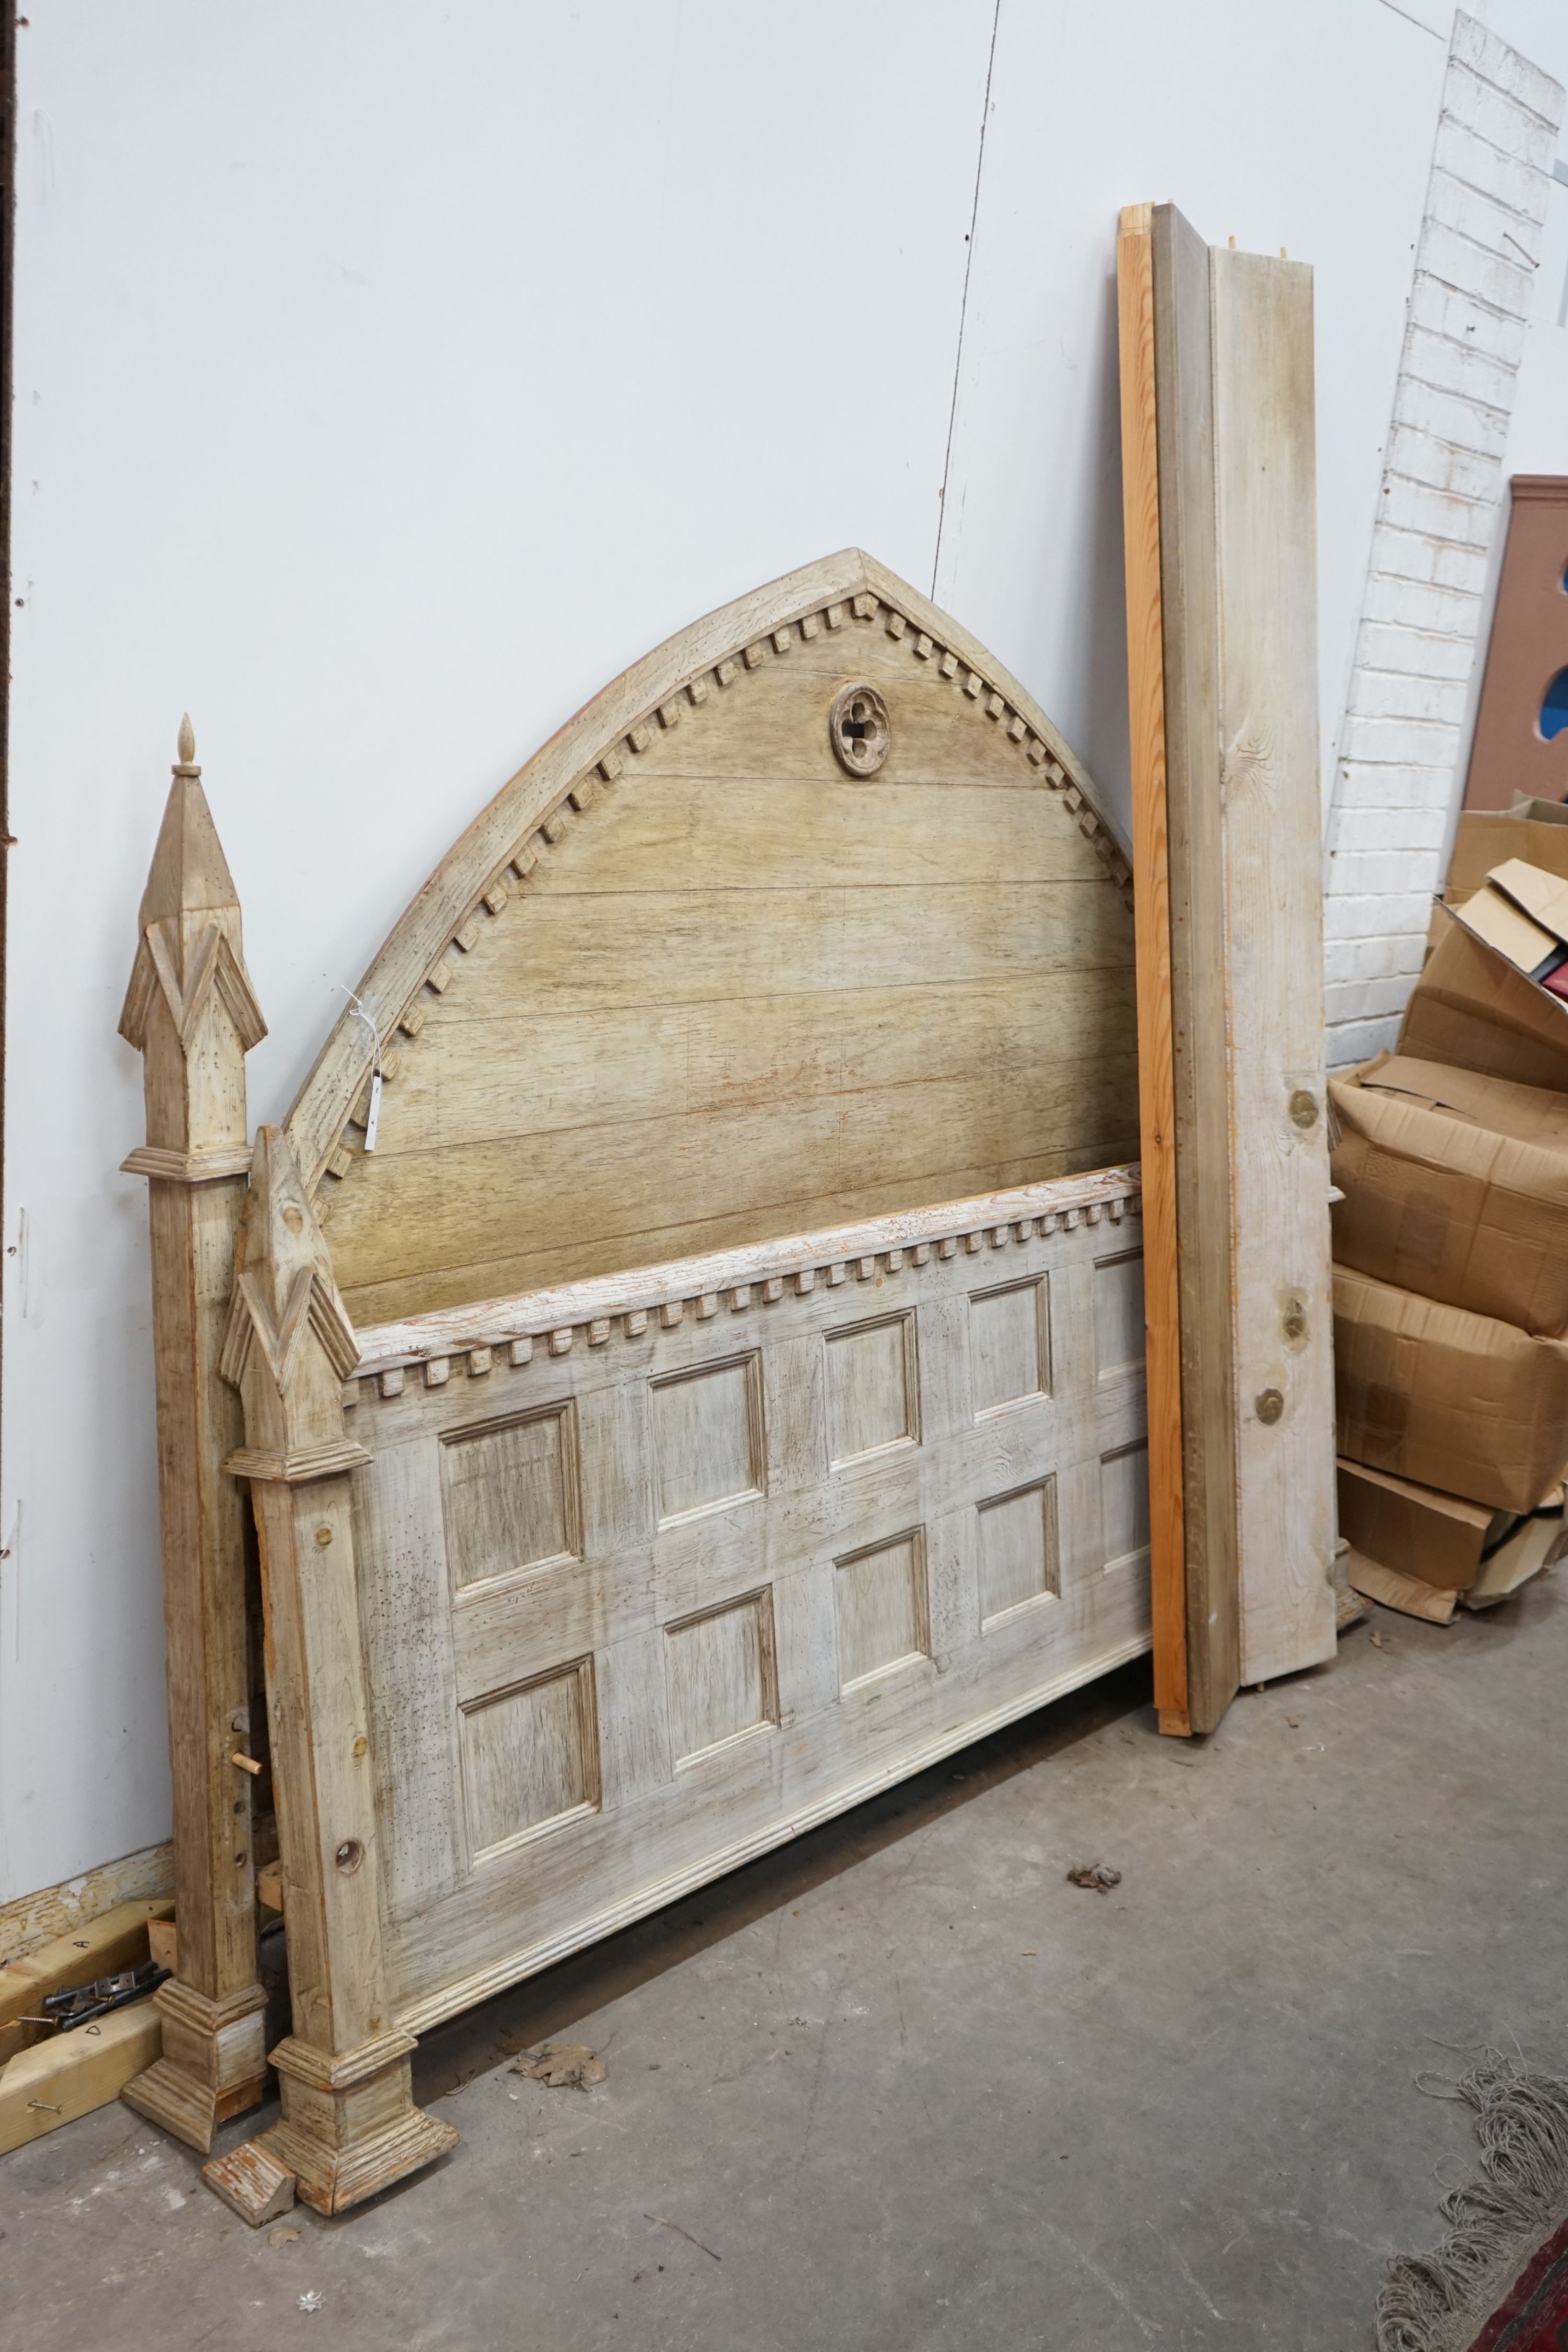 A large reproduction Gothic revival oak bedframe in the manner of Pugin, width 200cm